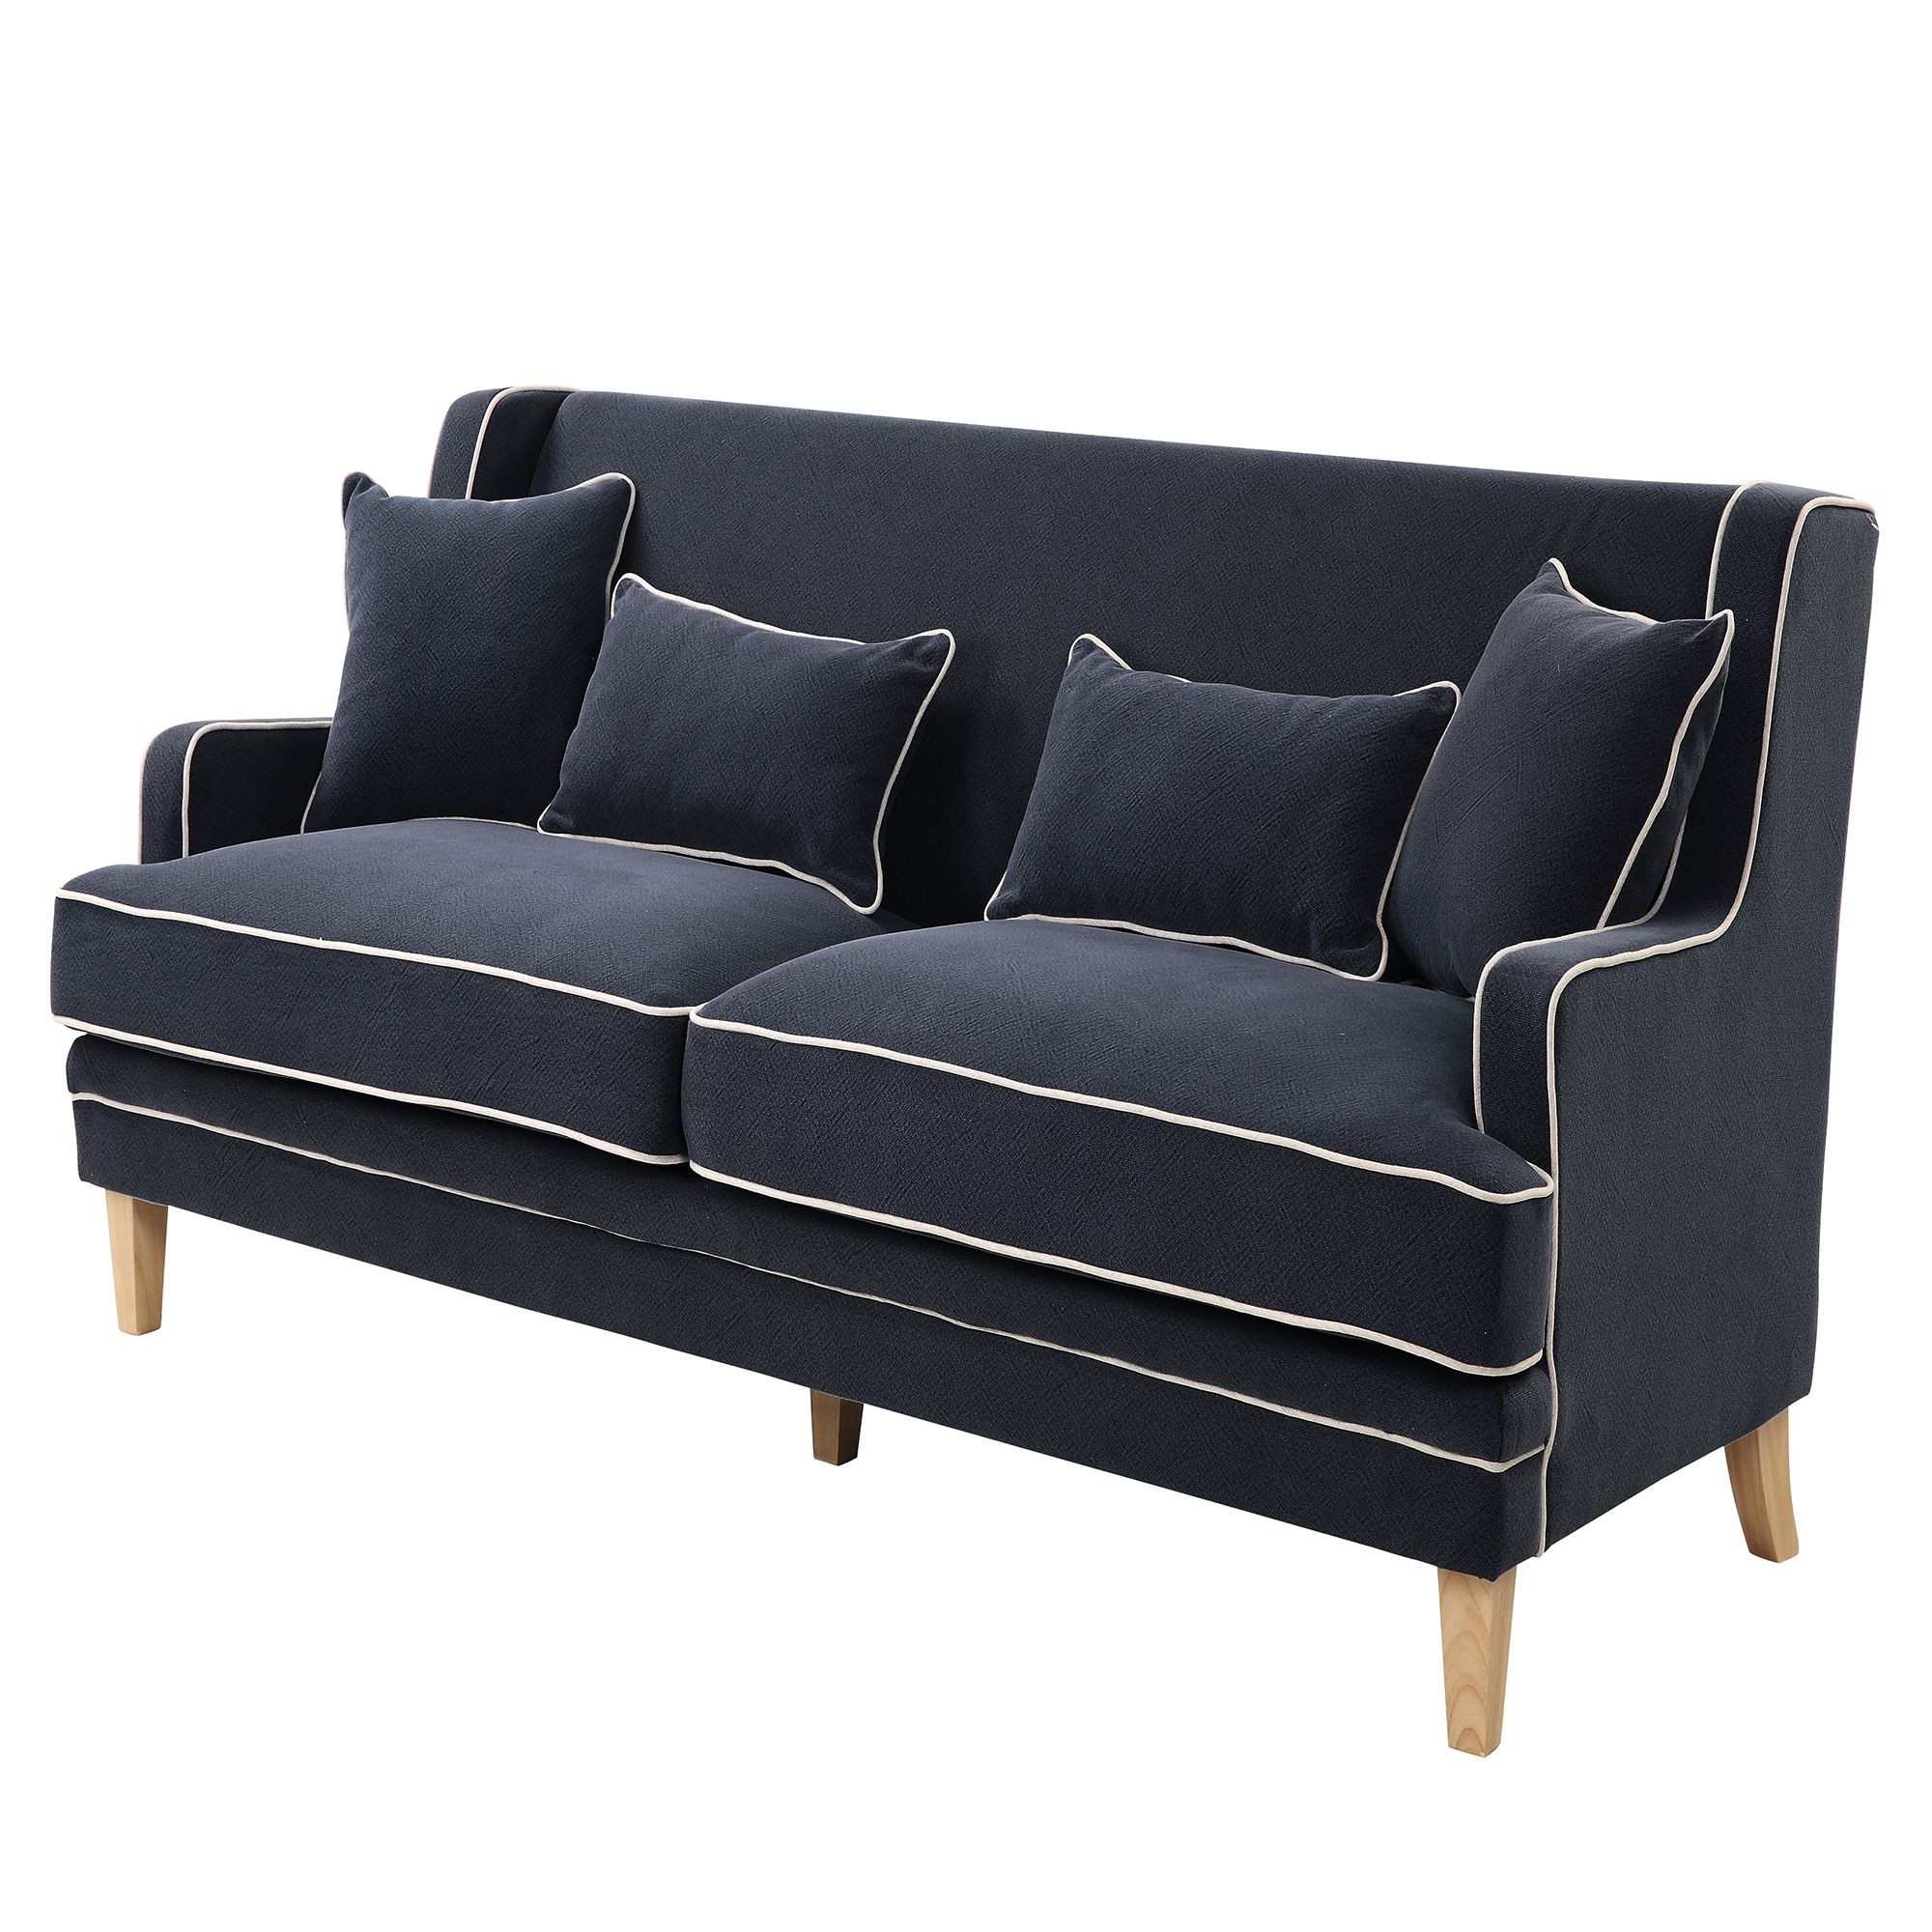 Bondi 3 Seat Sofa Navy And White Piping | Country Interiors Pertaining To Navy Linen Coil Sofas (View 15 of 20)